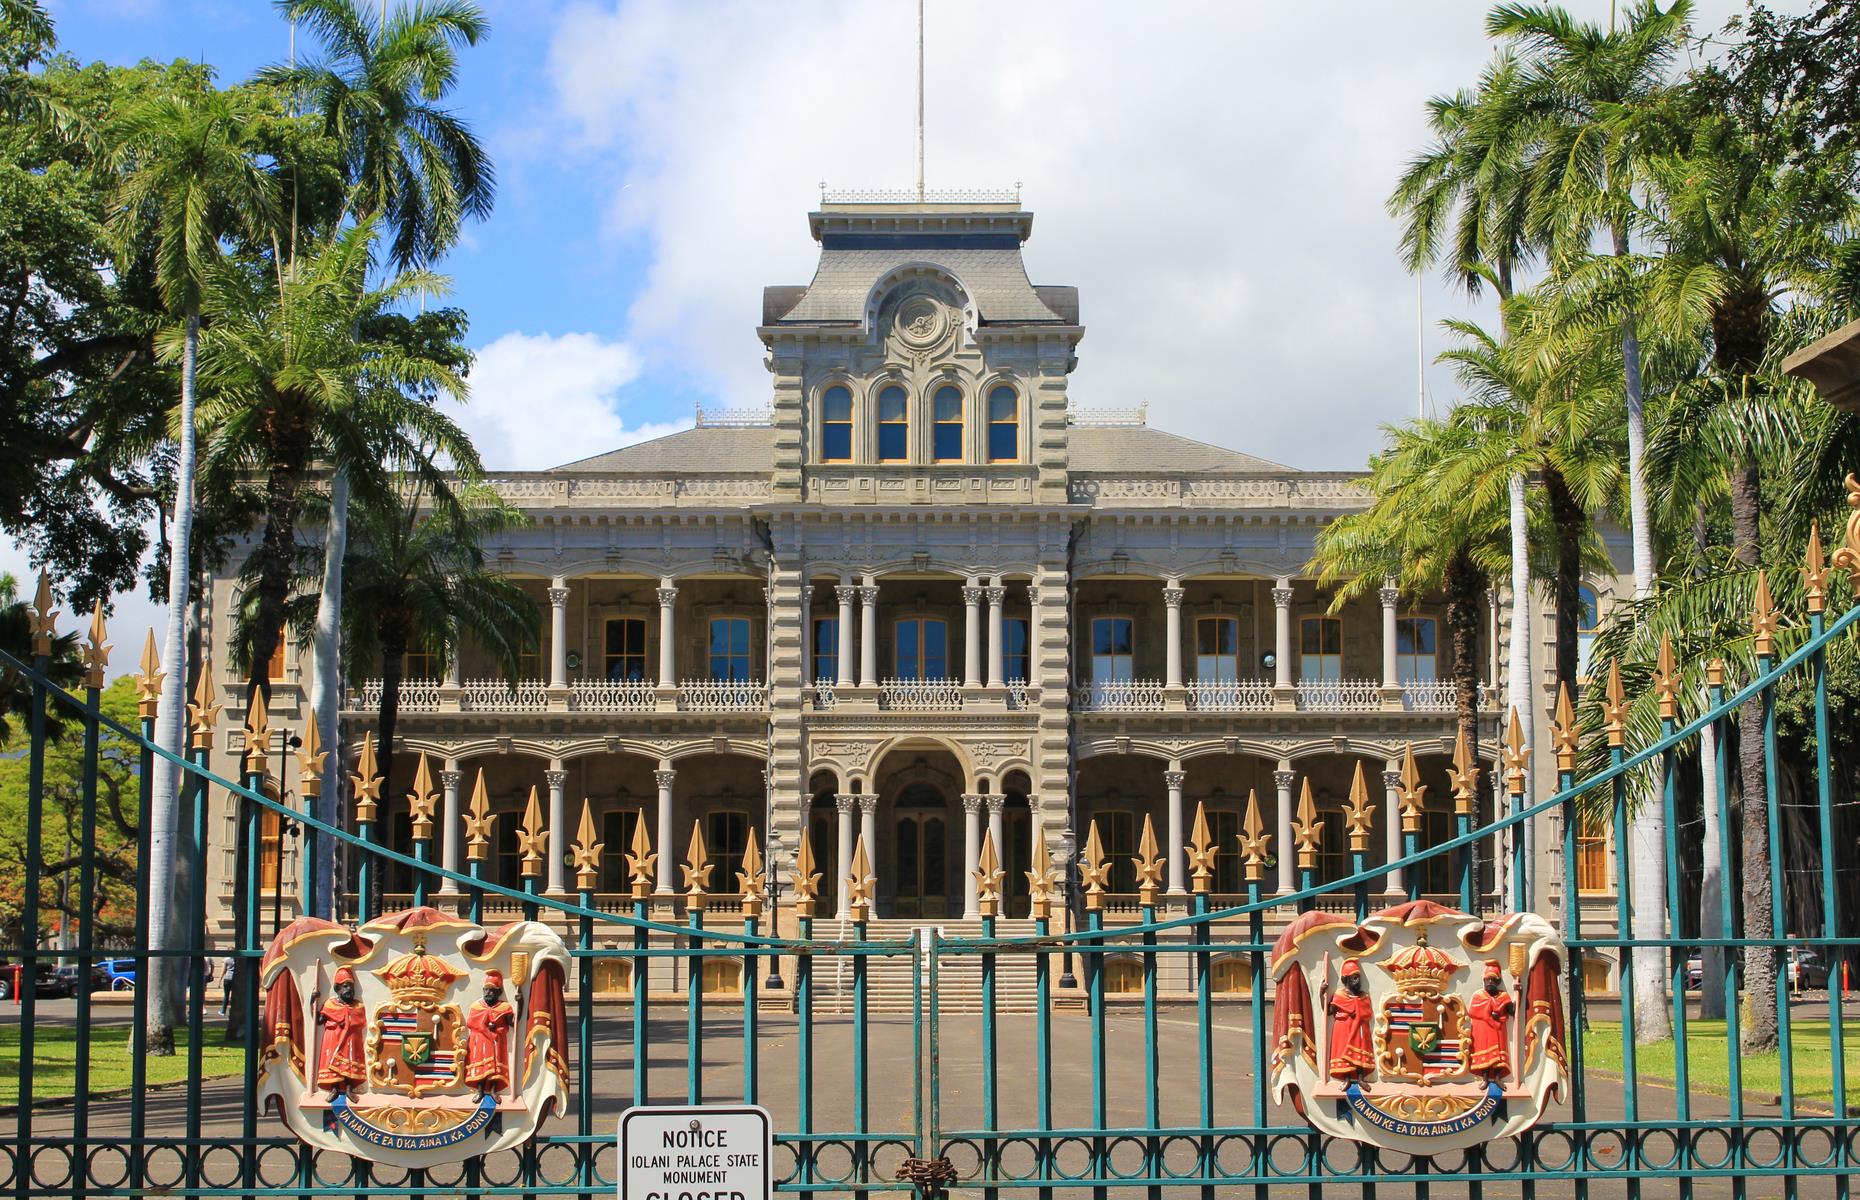 Slide 8 of 31: One of the few real palaces in the USA, Iolani Palace was home to the Hawaiian monarchy in the 19th century. The royal residence was completed in 1882 and was a sumptuous property ahead of its time, complete with electricity and indoor plumbing. Its architectural style is unique, dubbed American Florentine for its blend of traditional Hawaiian and Italian Renaissance features – the elegant columns and bold corner towers are particularly striking.